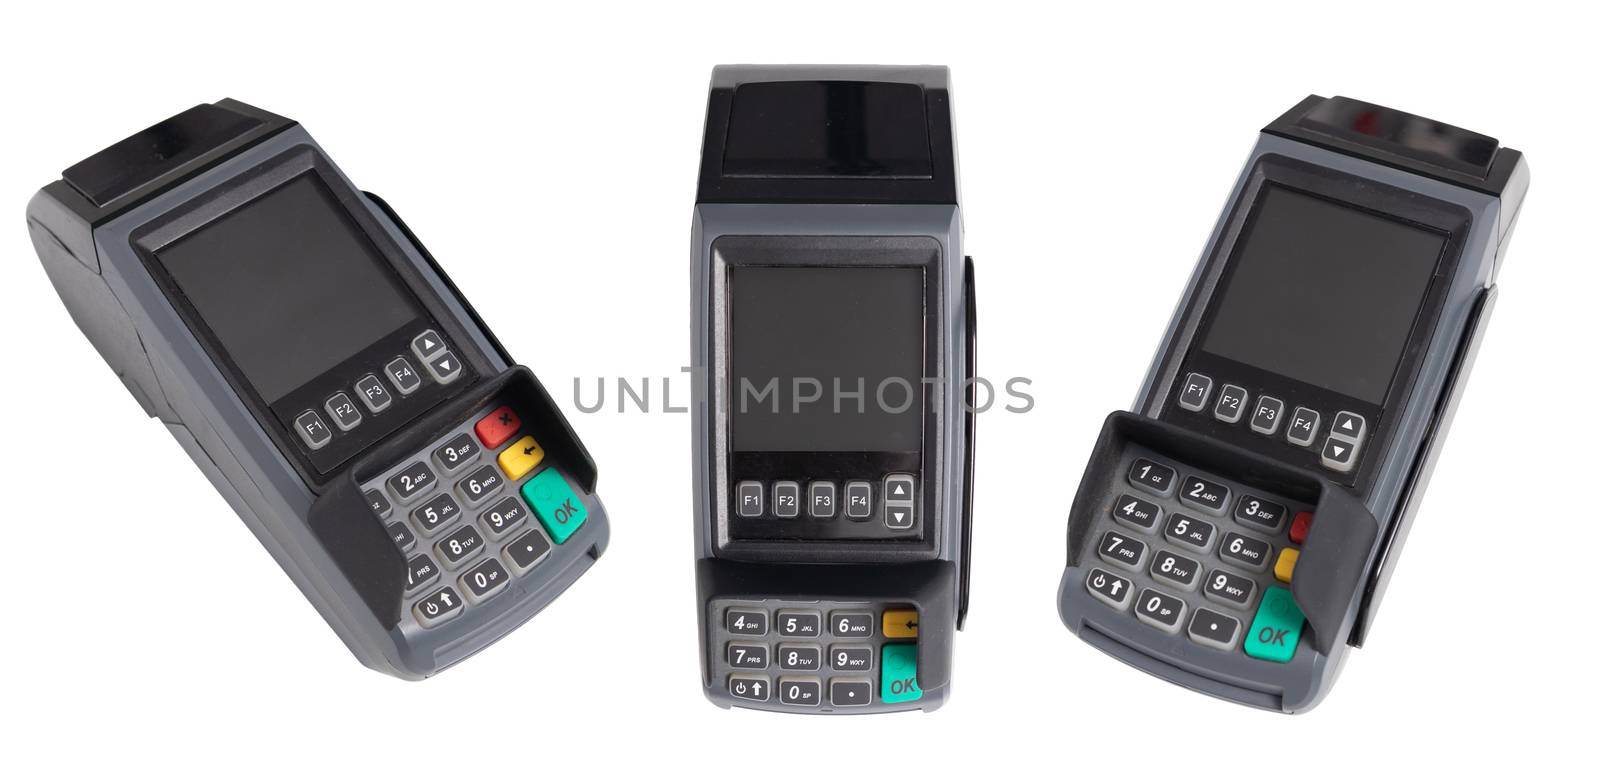 point of sale, credit card reader payment terminal. set of credit card swipe machine from 3 side  isolated on white background with clipping path